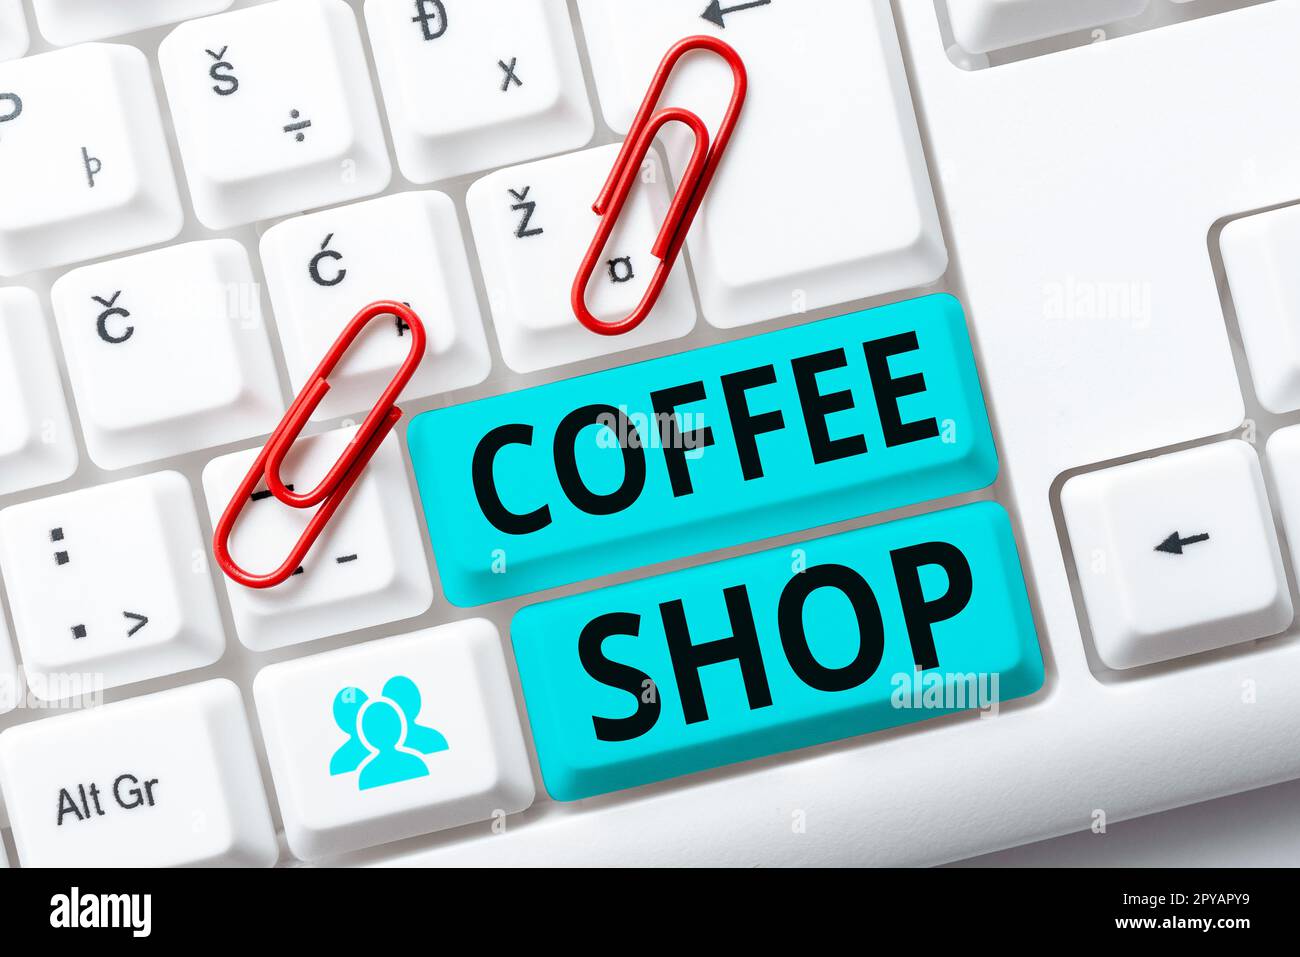 Writing displaying text Coffee Shop. Word Written on small informal restaurant serving coffee and light refreshments Stock Photo